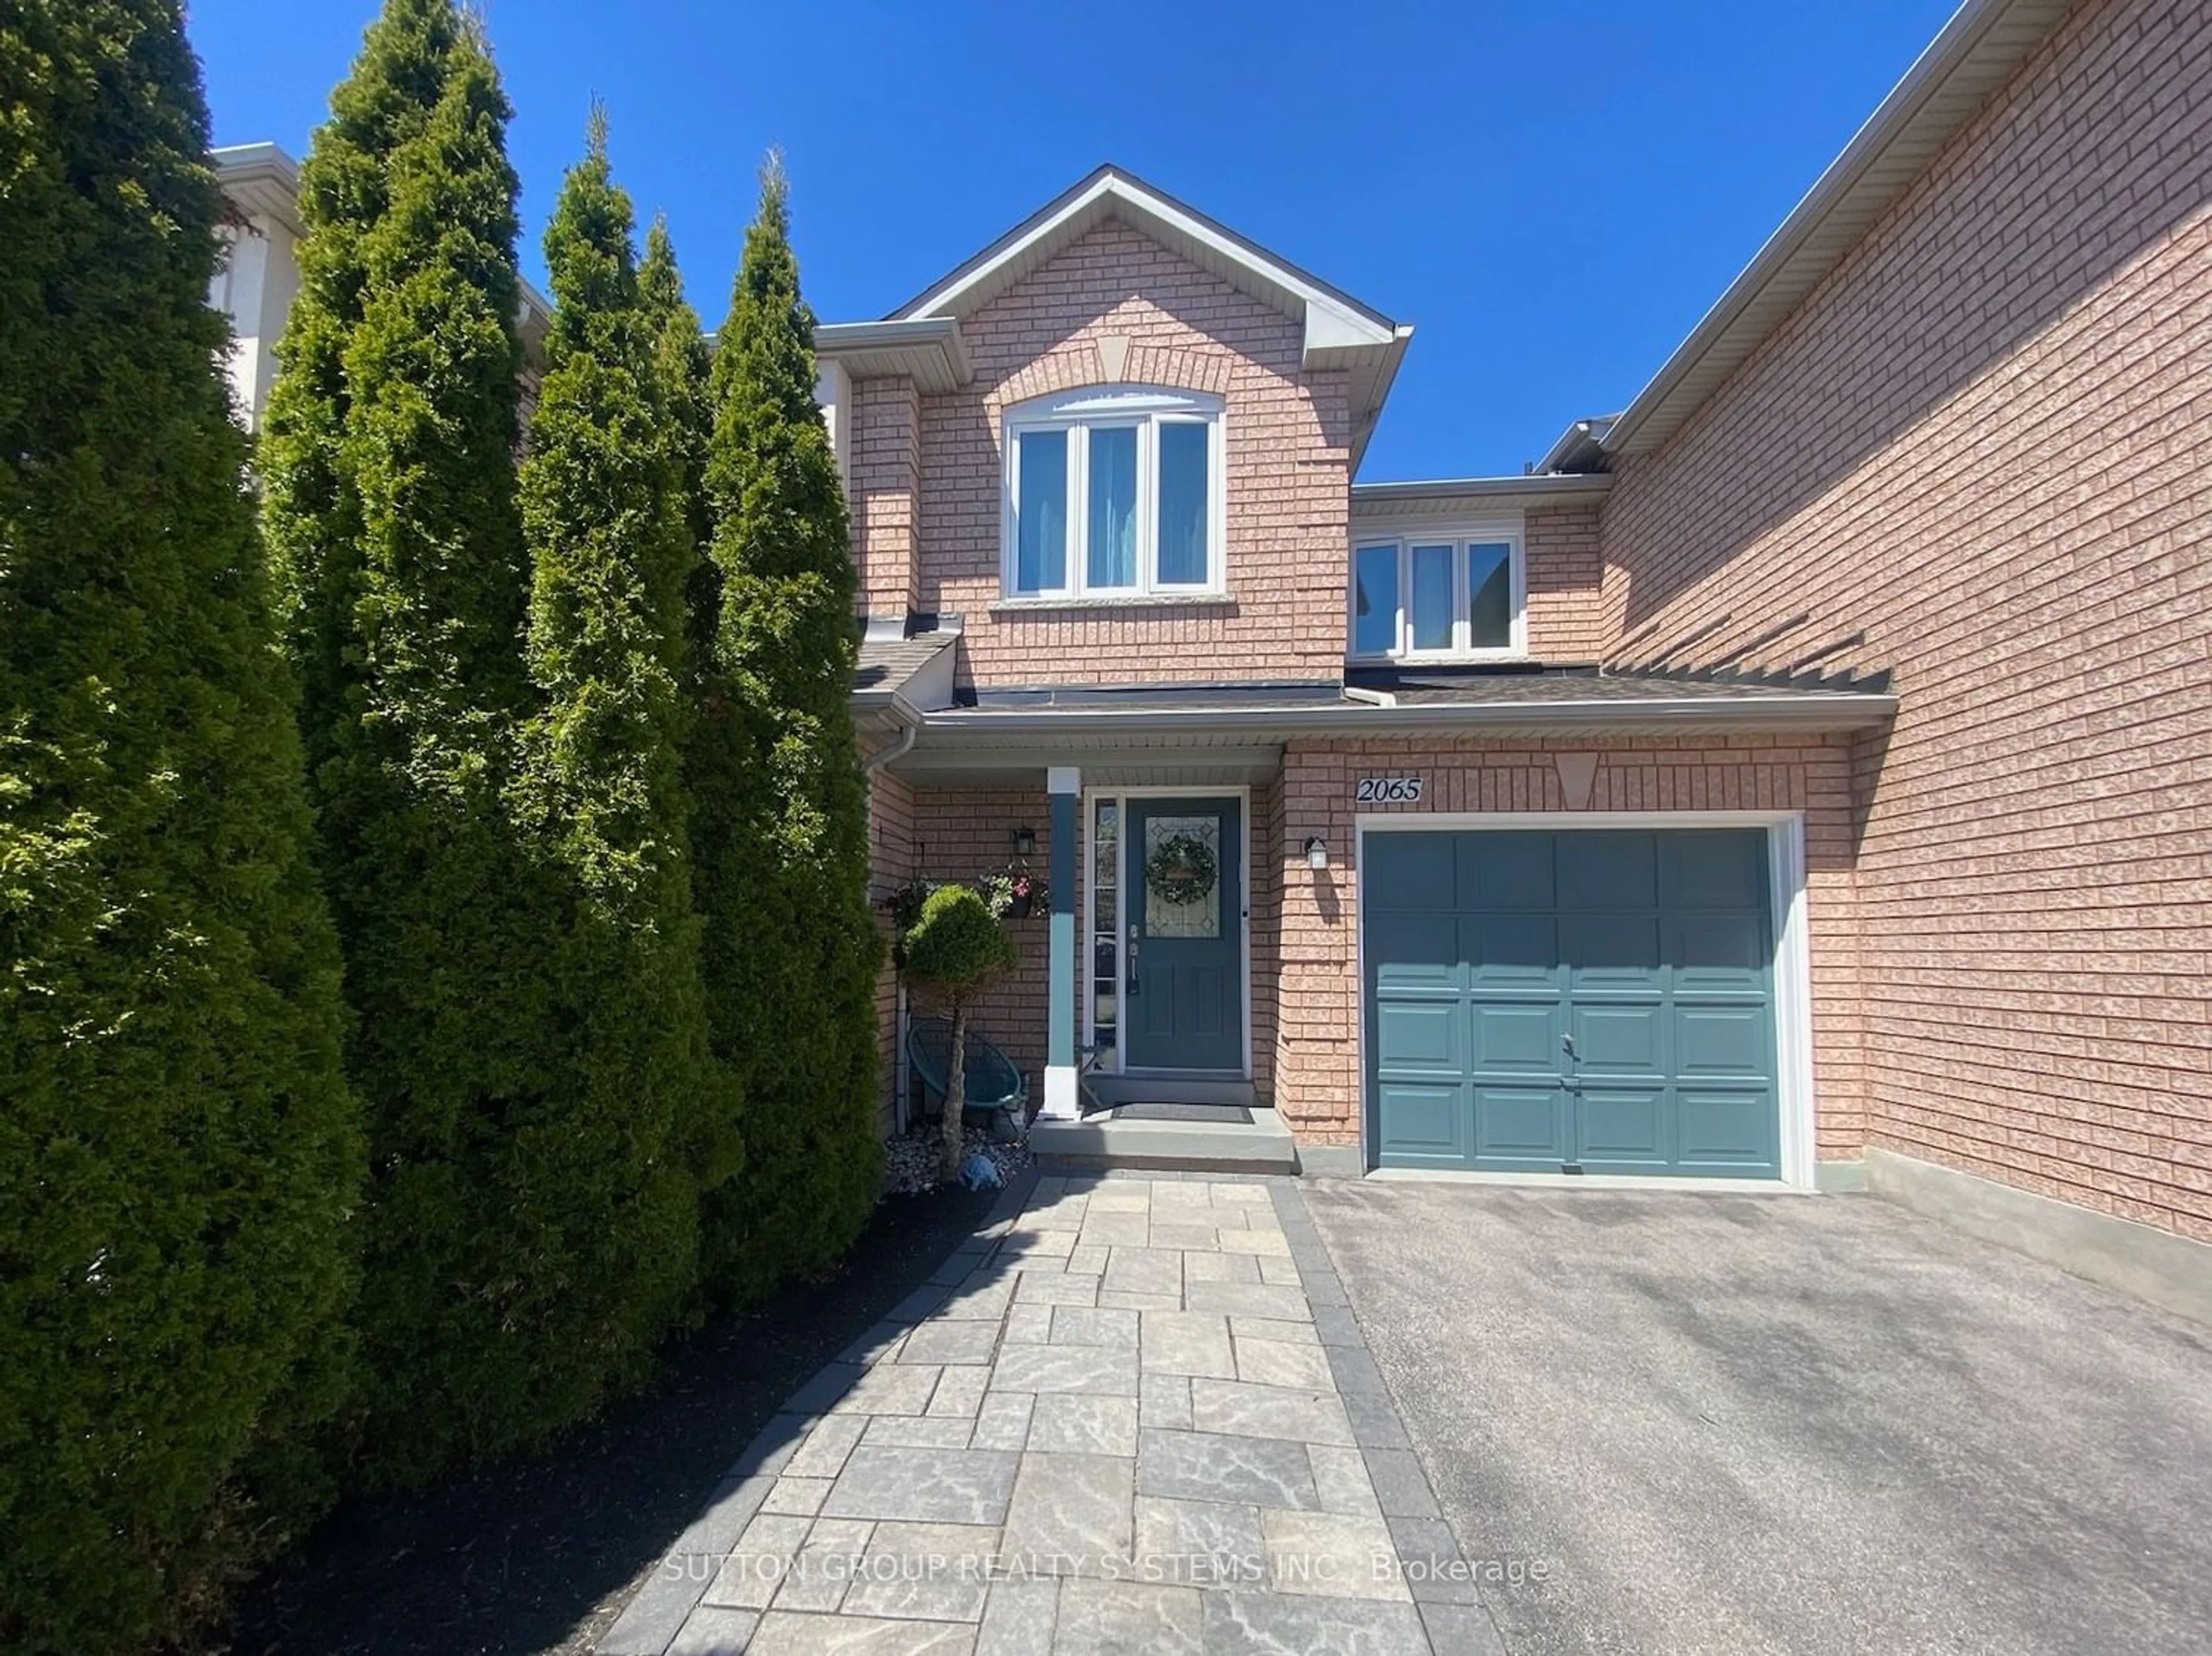 Home with brick exterior material for 2065 Golden Orchard Tr, Oakville Ontario L6M 3N5